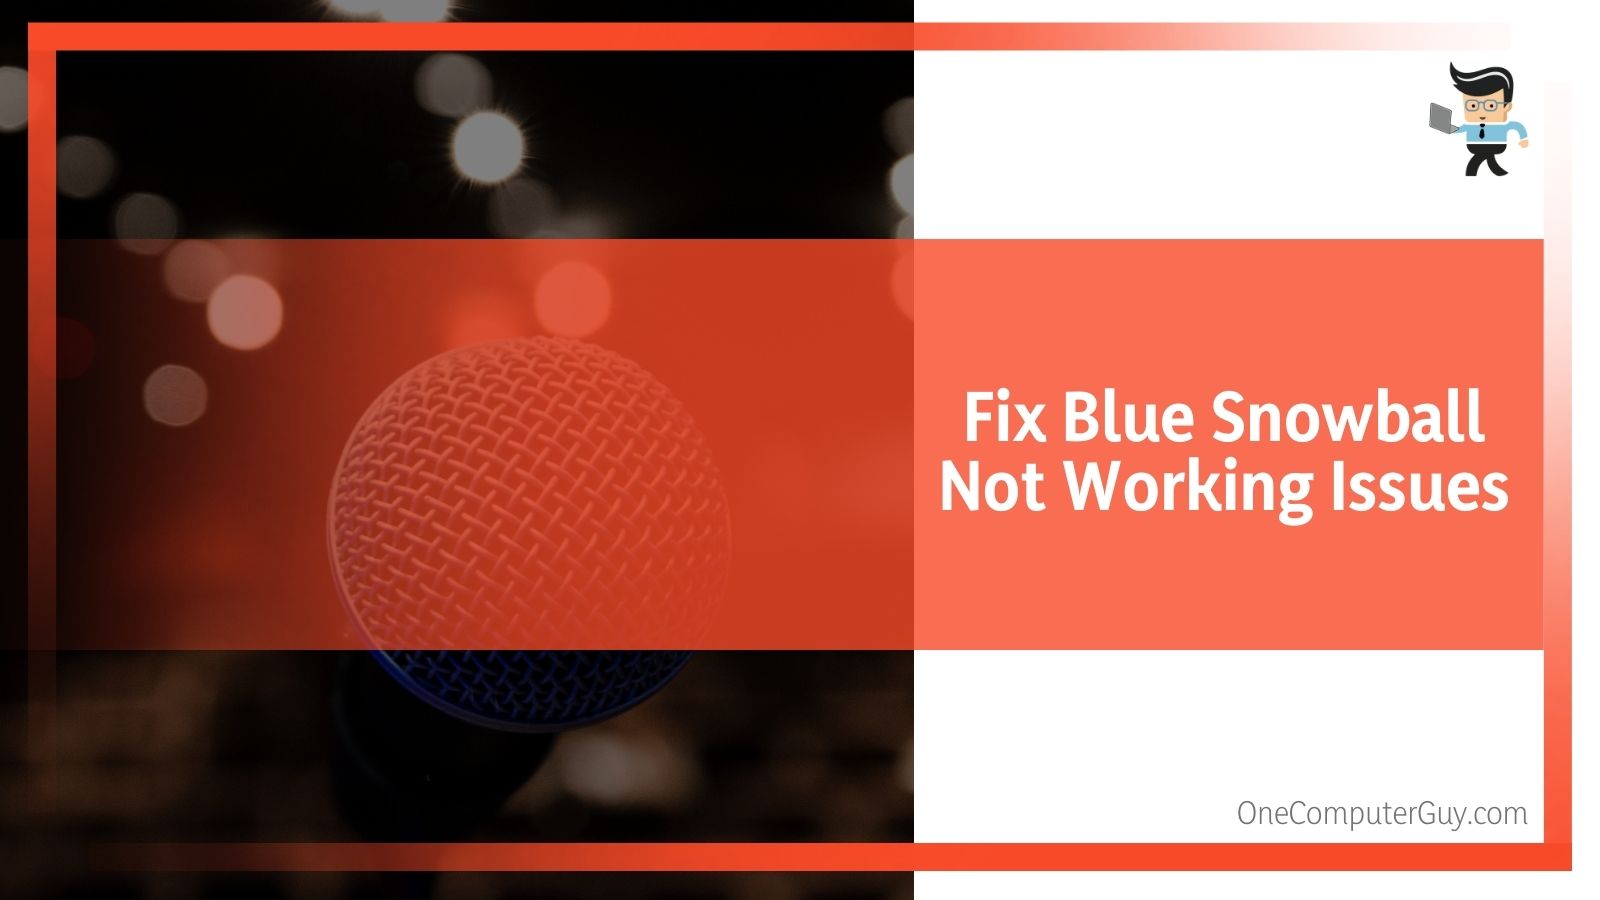 Fix Blue Snowball Not Working Issues